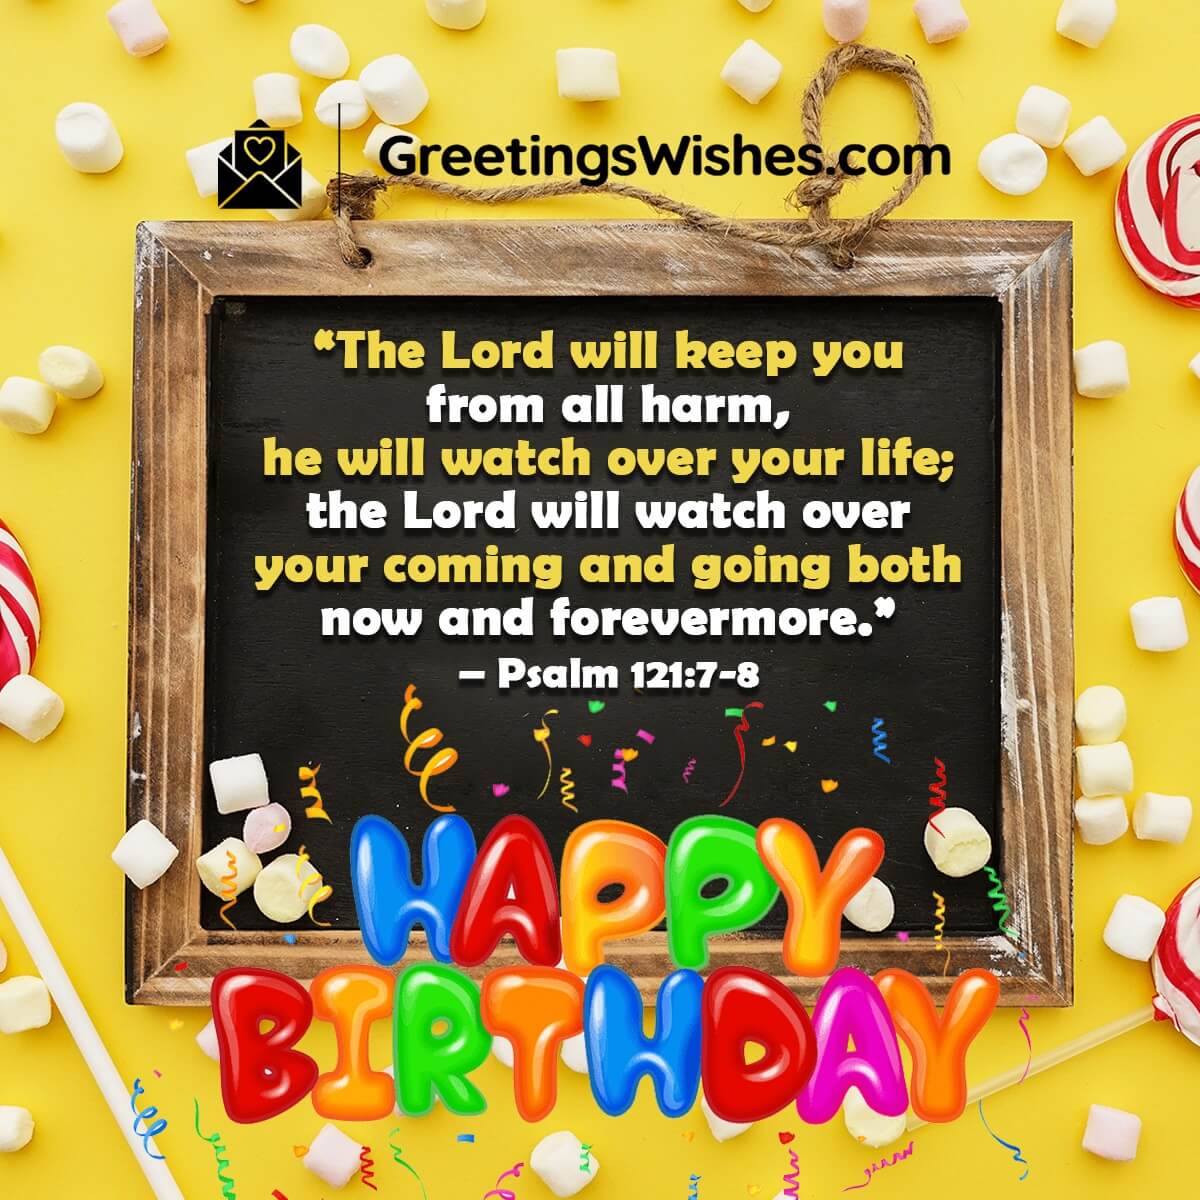 Bible Verses For Birthday Blessings & Wishes - Greetings Wishes